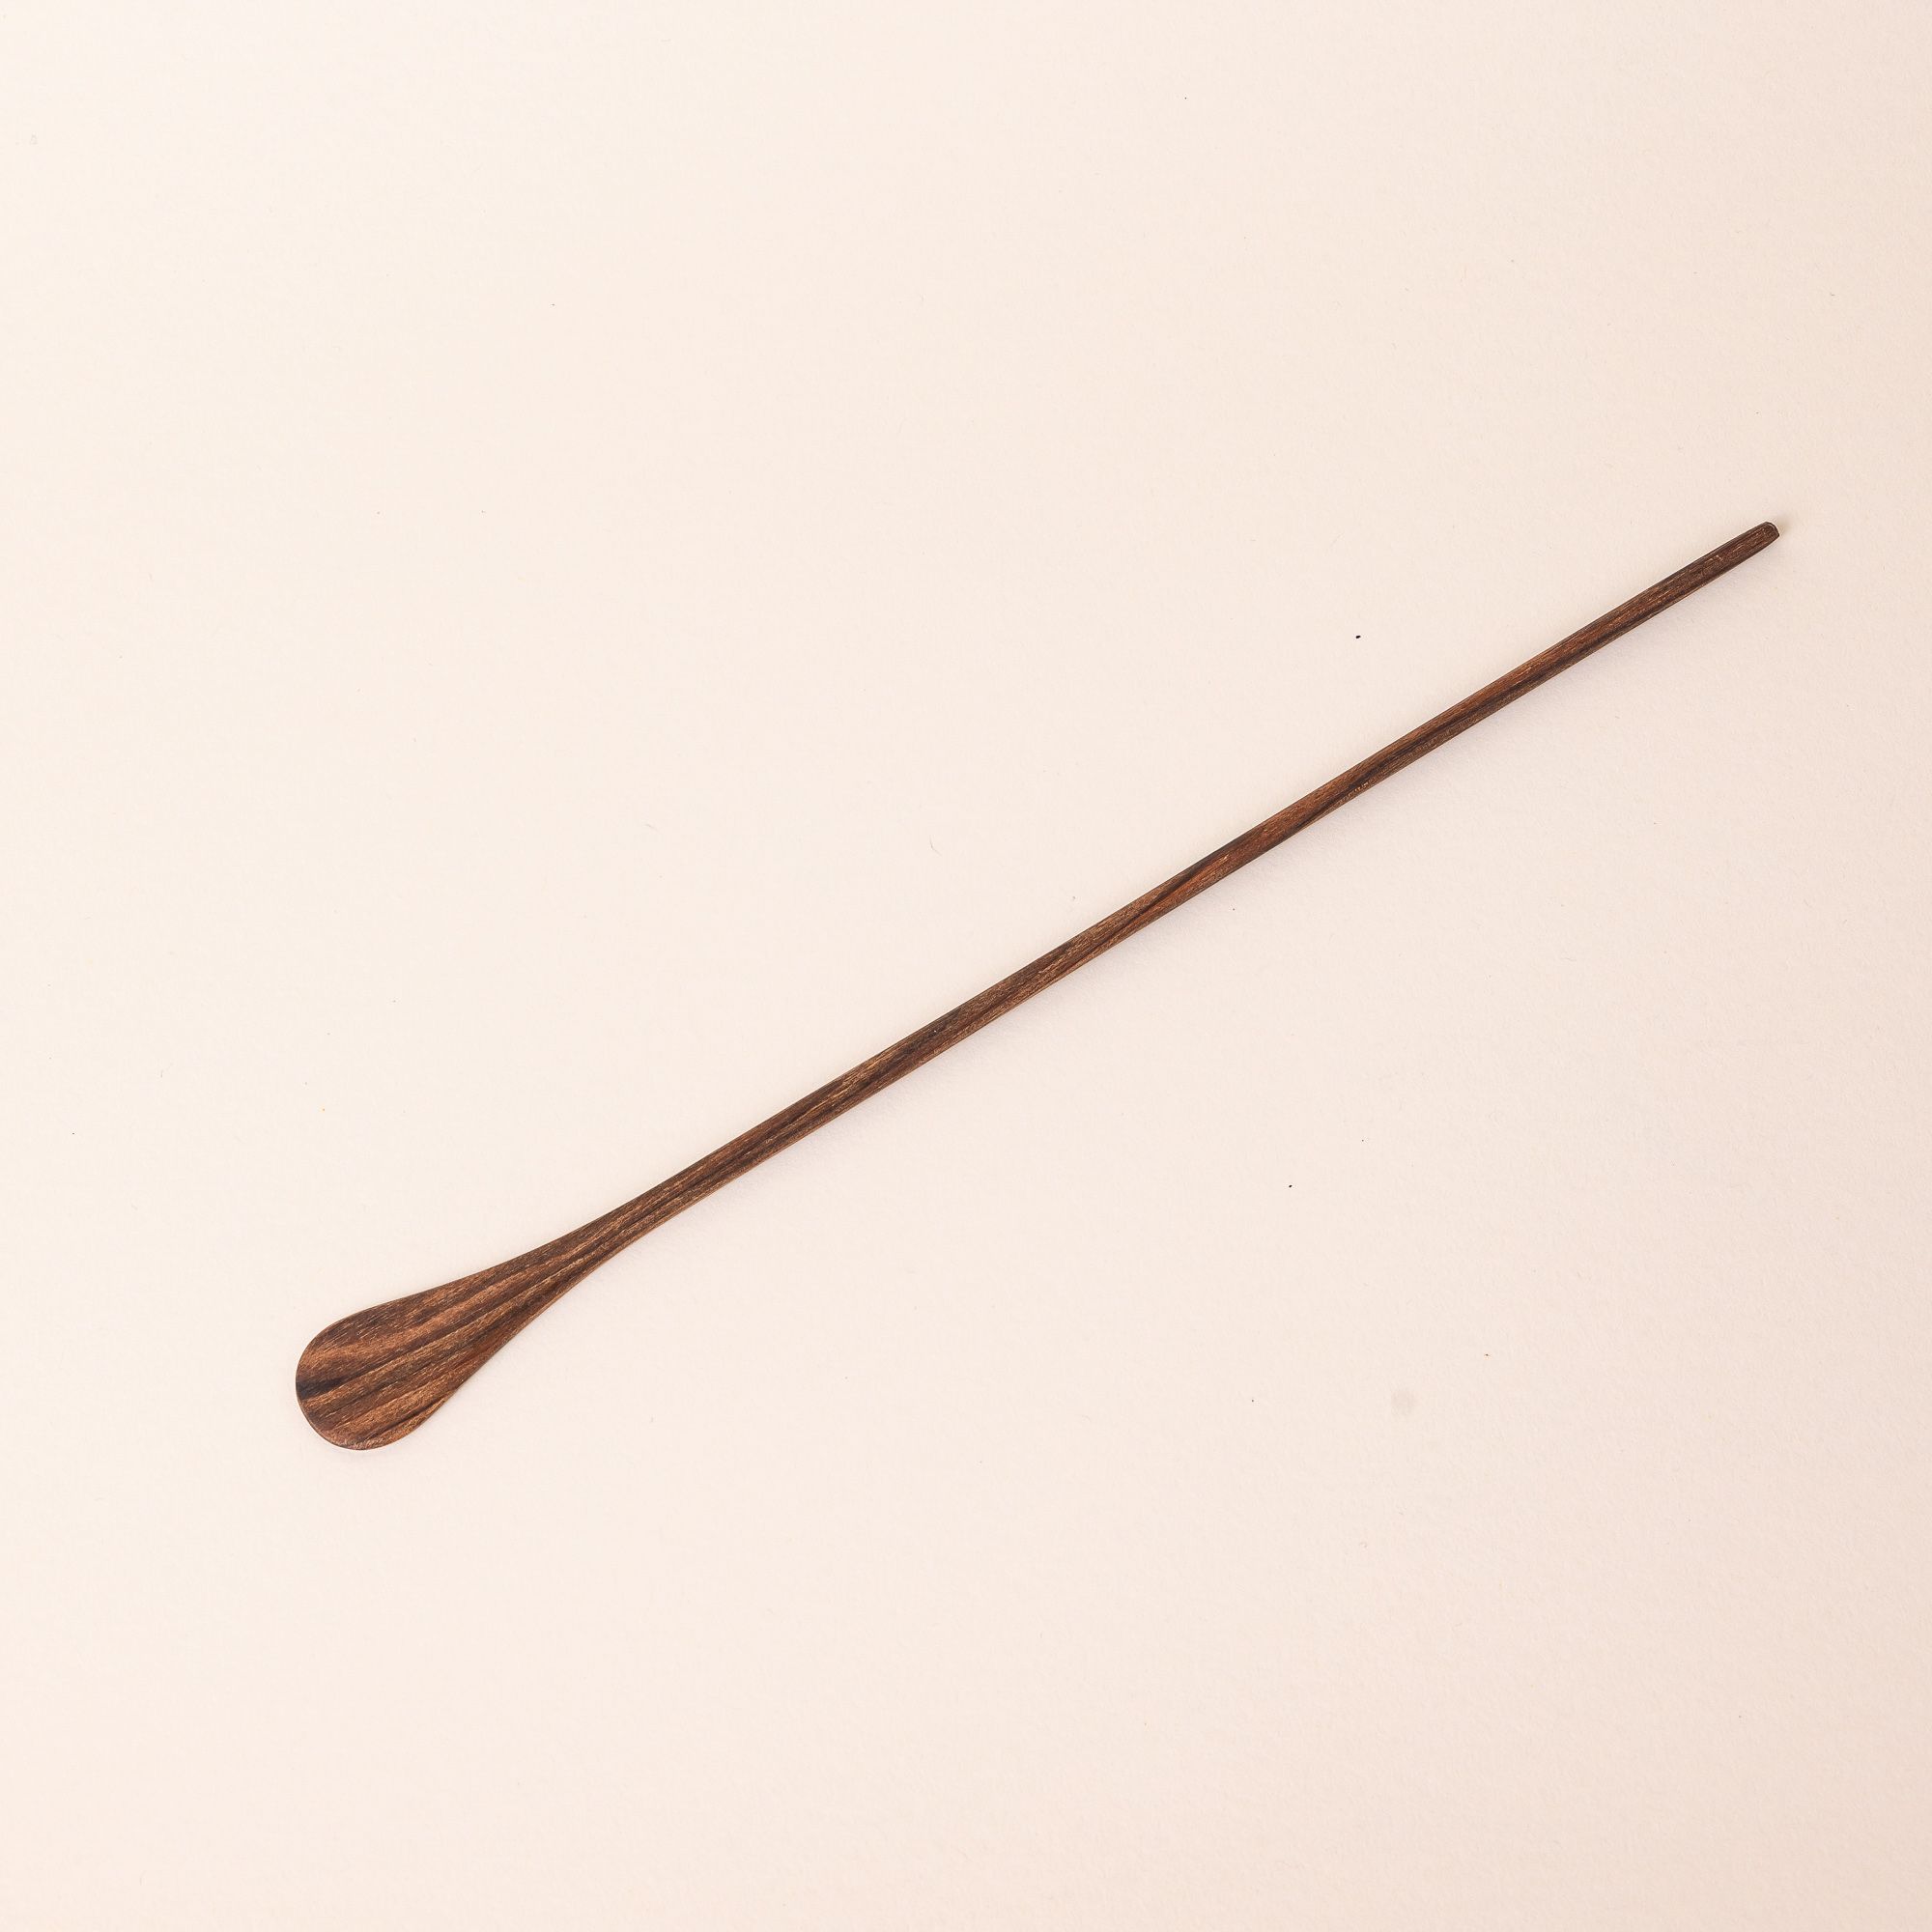 A long thin walnut cocktail stirrer with a small spoon-like shape on the end